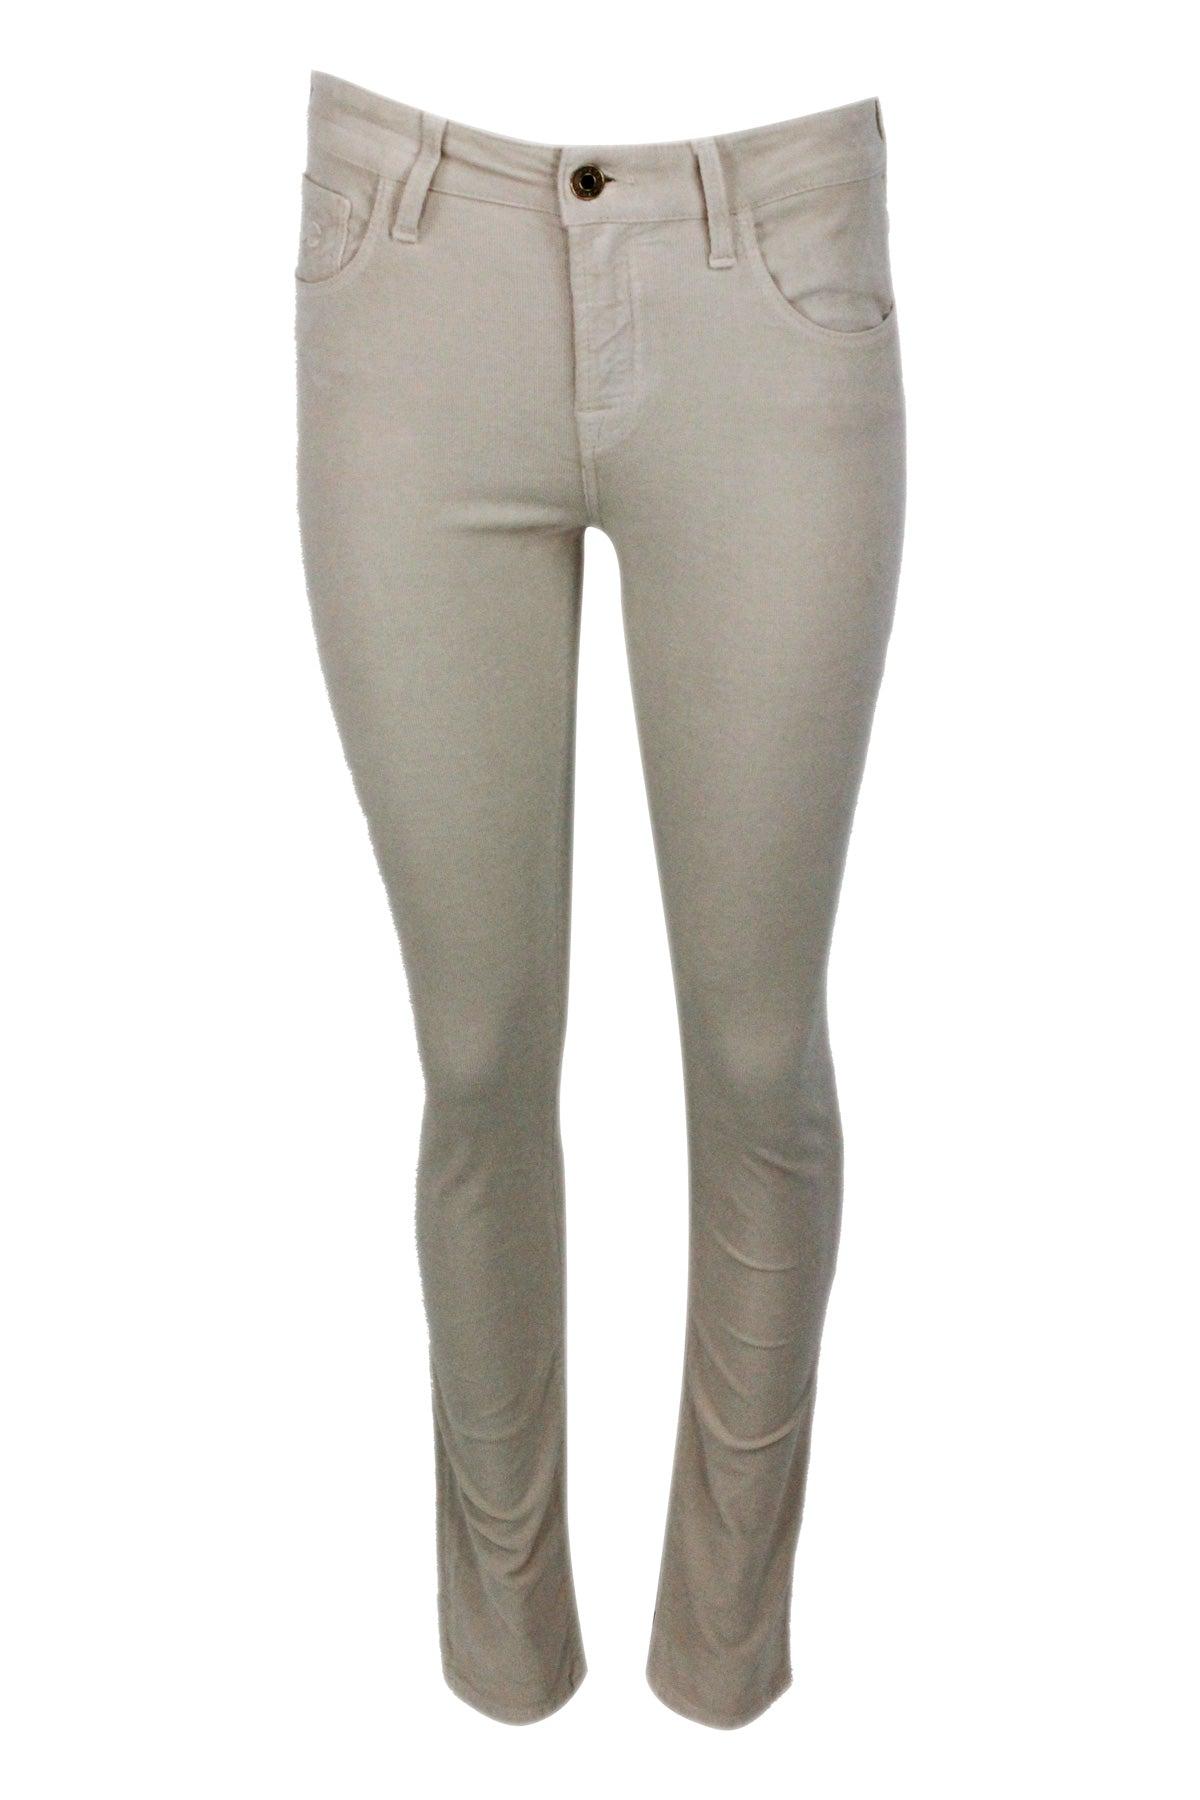 Jacob Cohen Denim Trousers Nn236 in Green Womens Clothing Trousers Slacks and Chinos Skinny trousers 